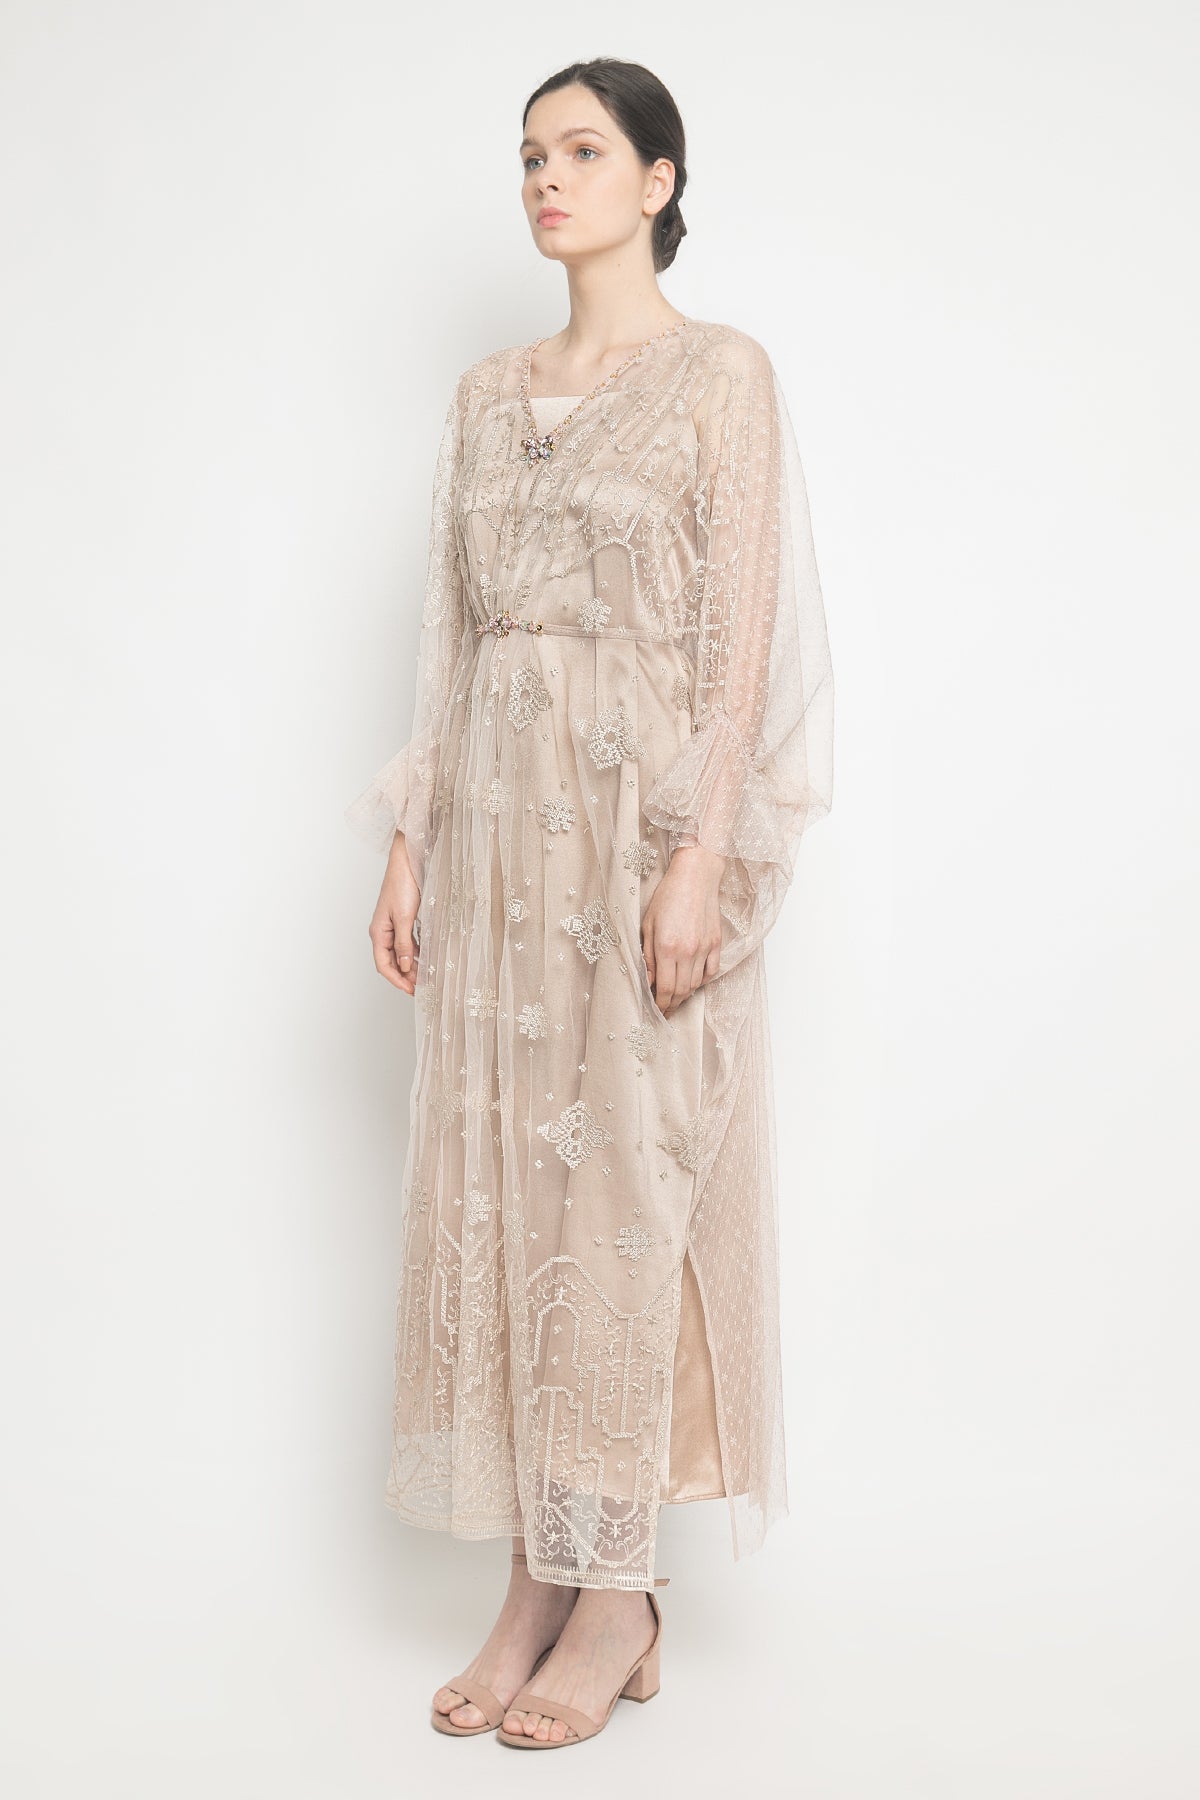 Zhafira Dres in Nude